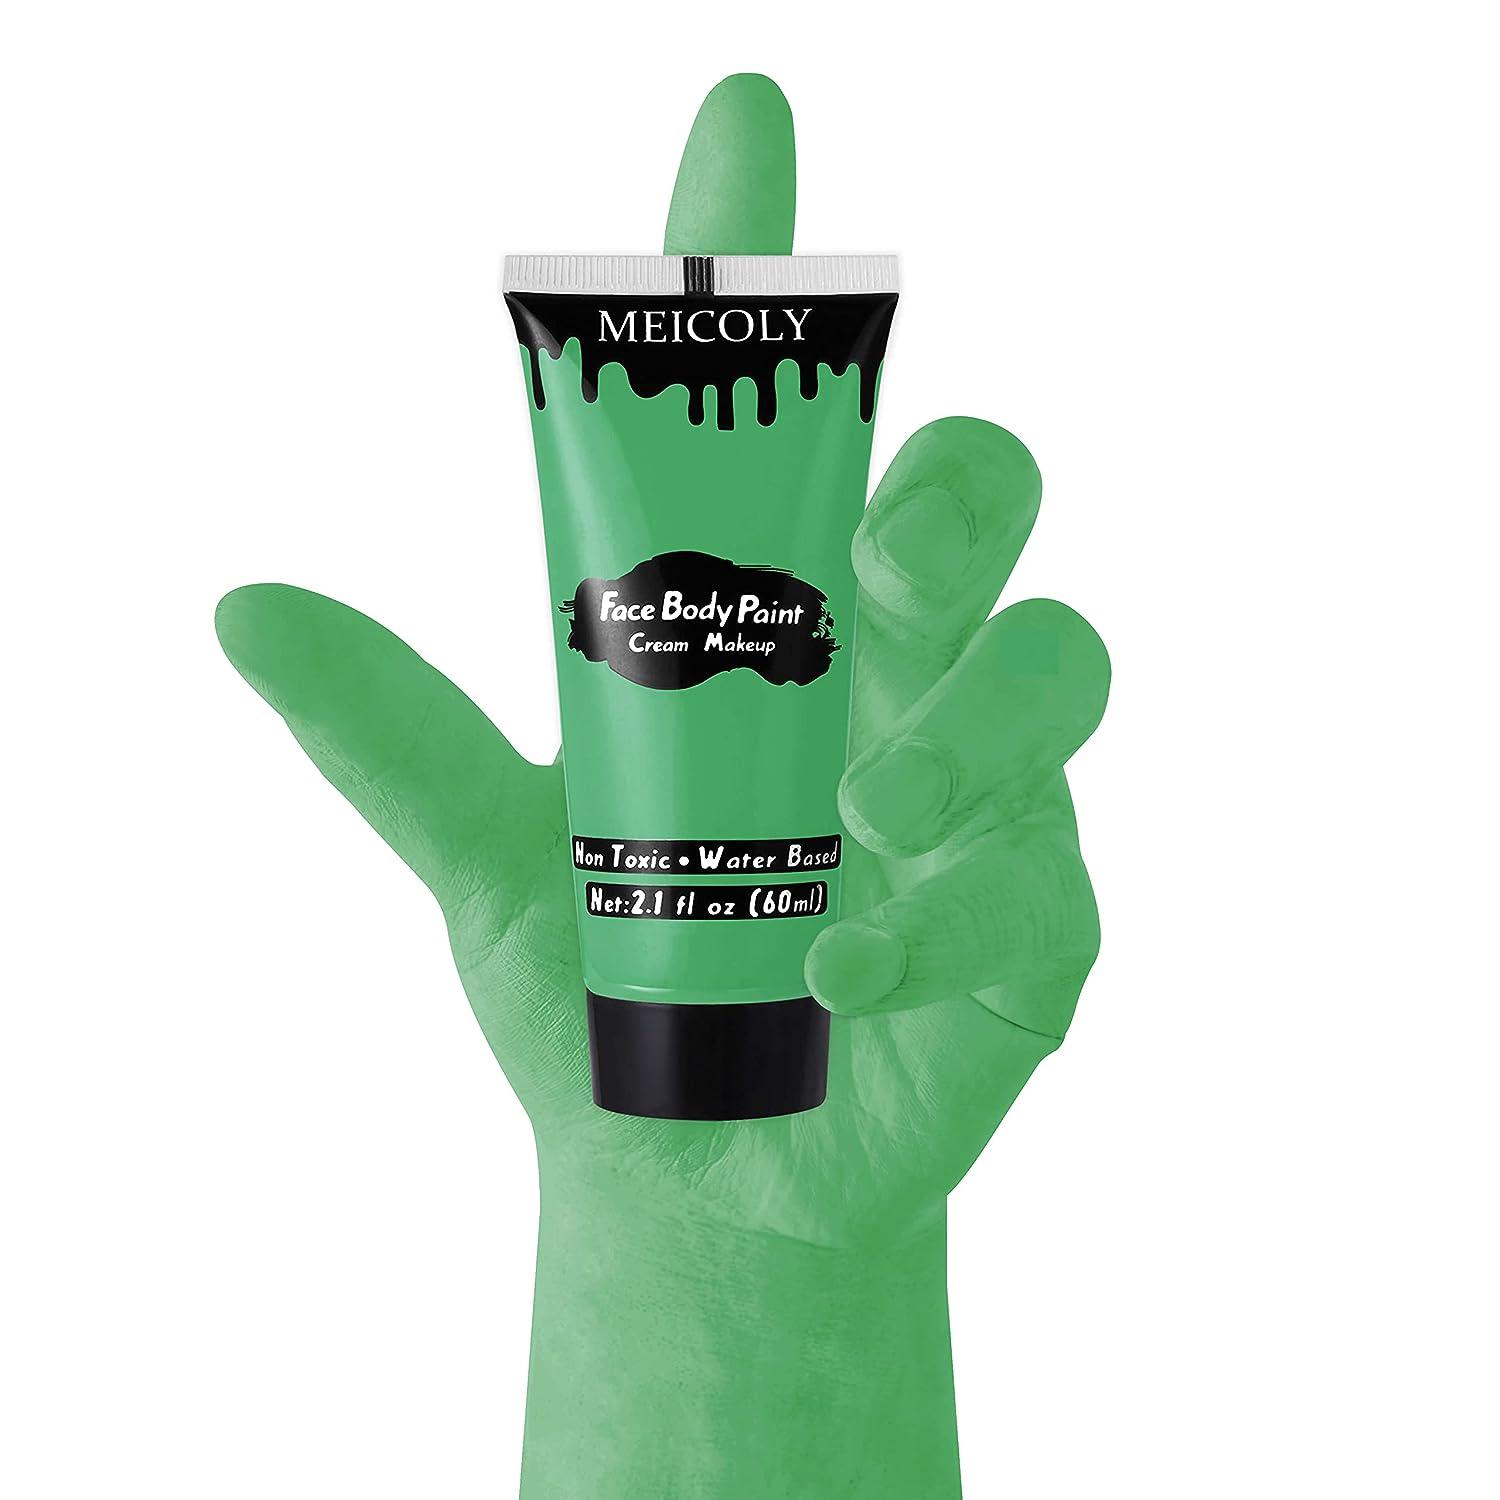 MEICOLY Green Cream Face Body Paint, Christmas Grinch Face Paint